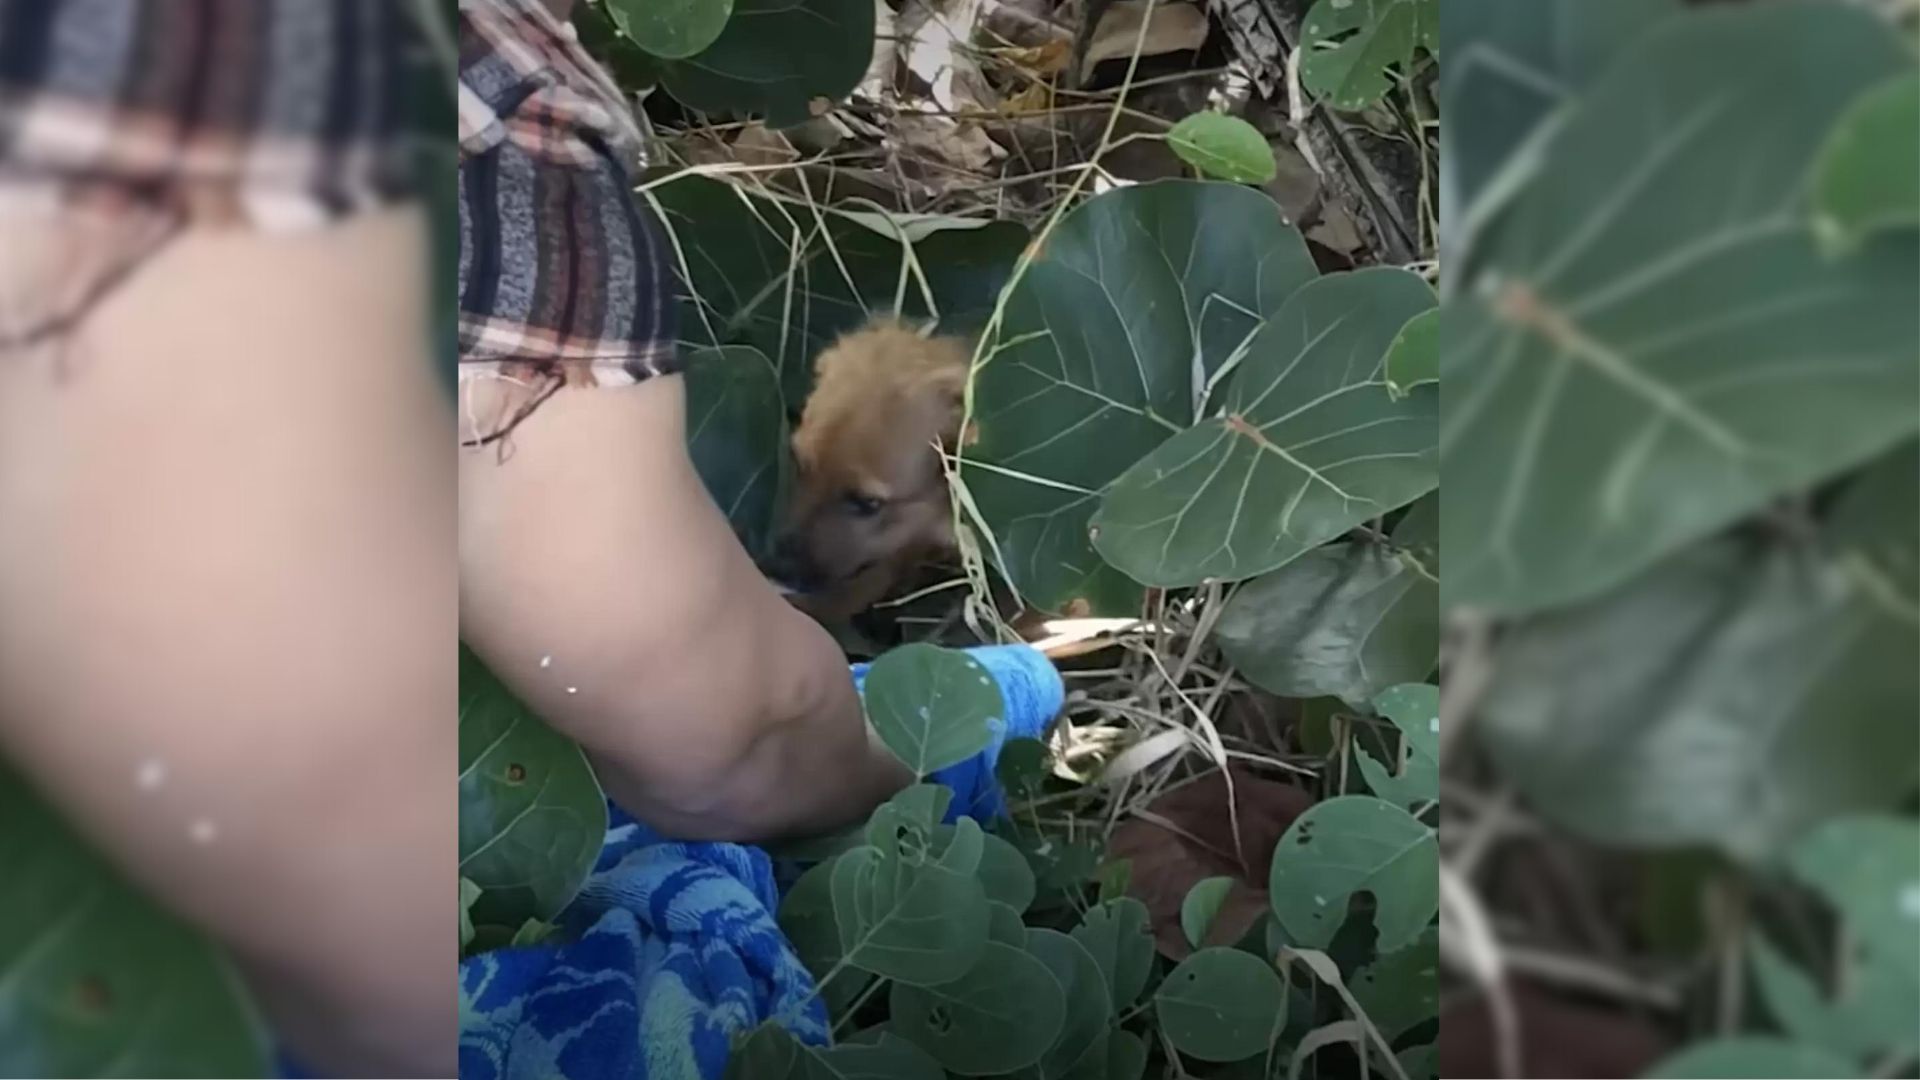 Florida Couple Stumbles Upon An Unexpected Surprise On Their Hike In The Woods